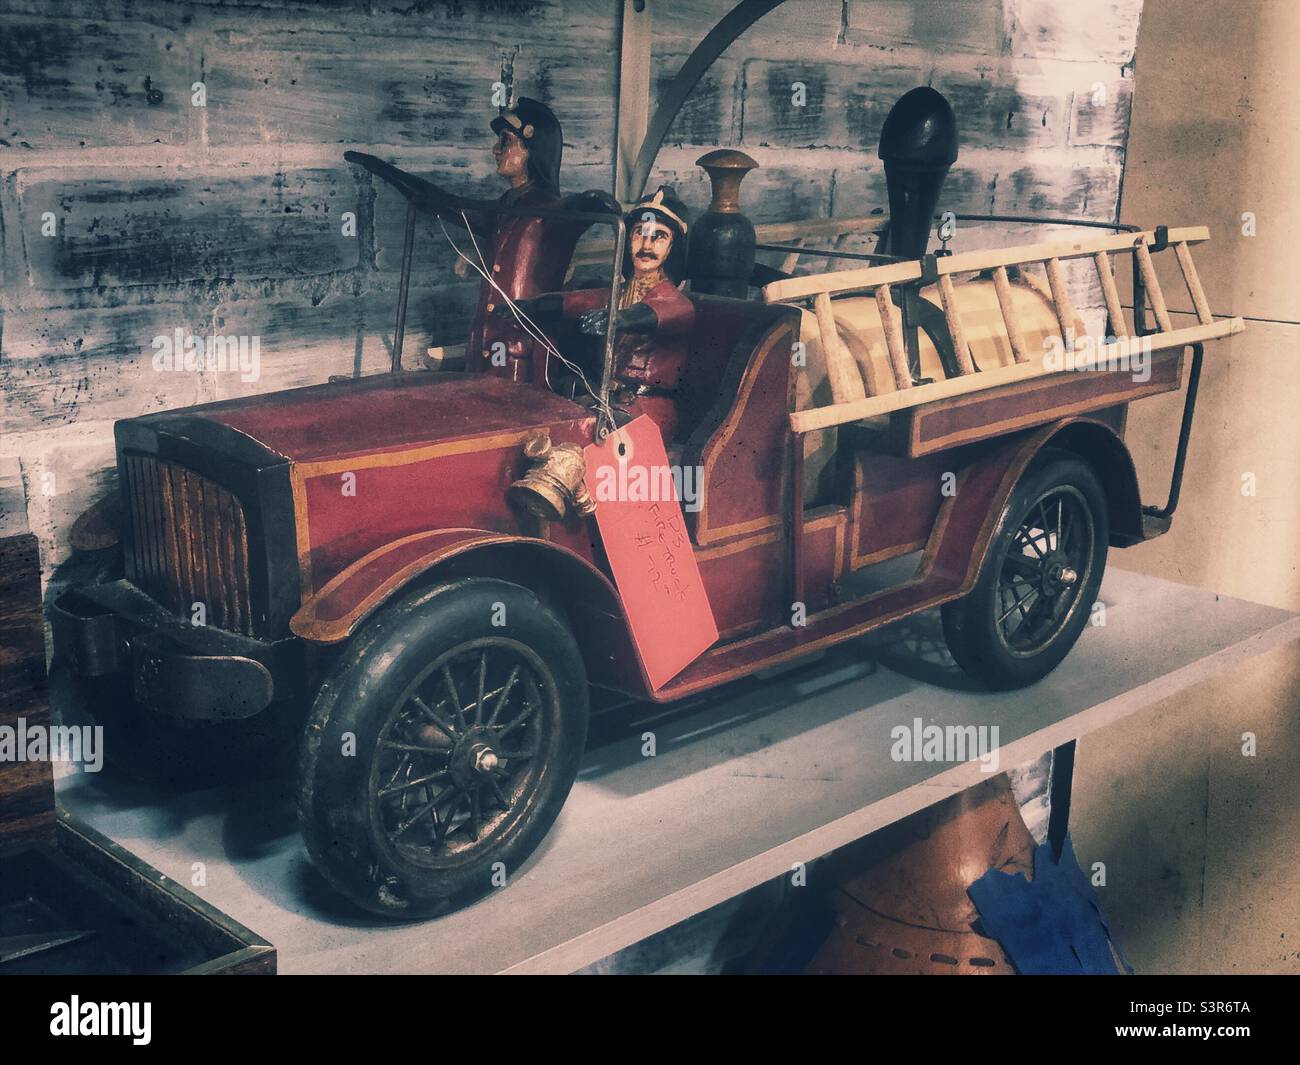 Vintage tin fire truck toy on display at antique mall Stock Photo